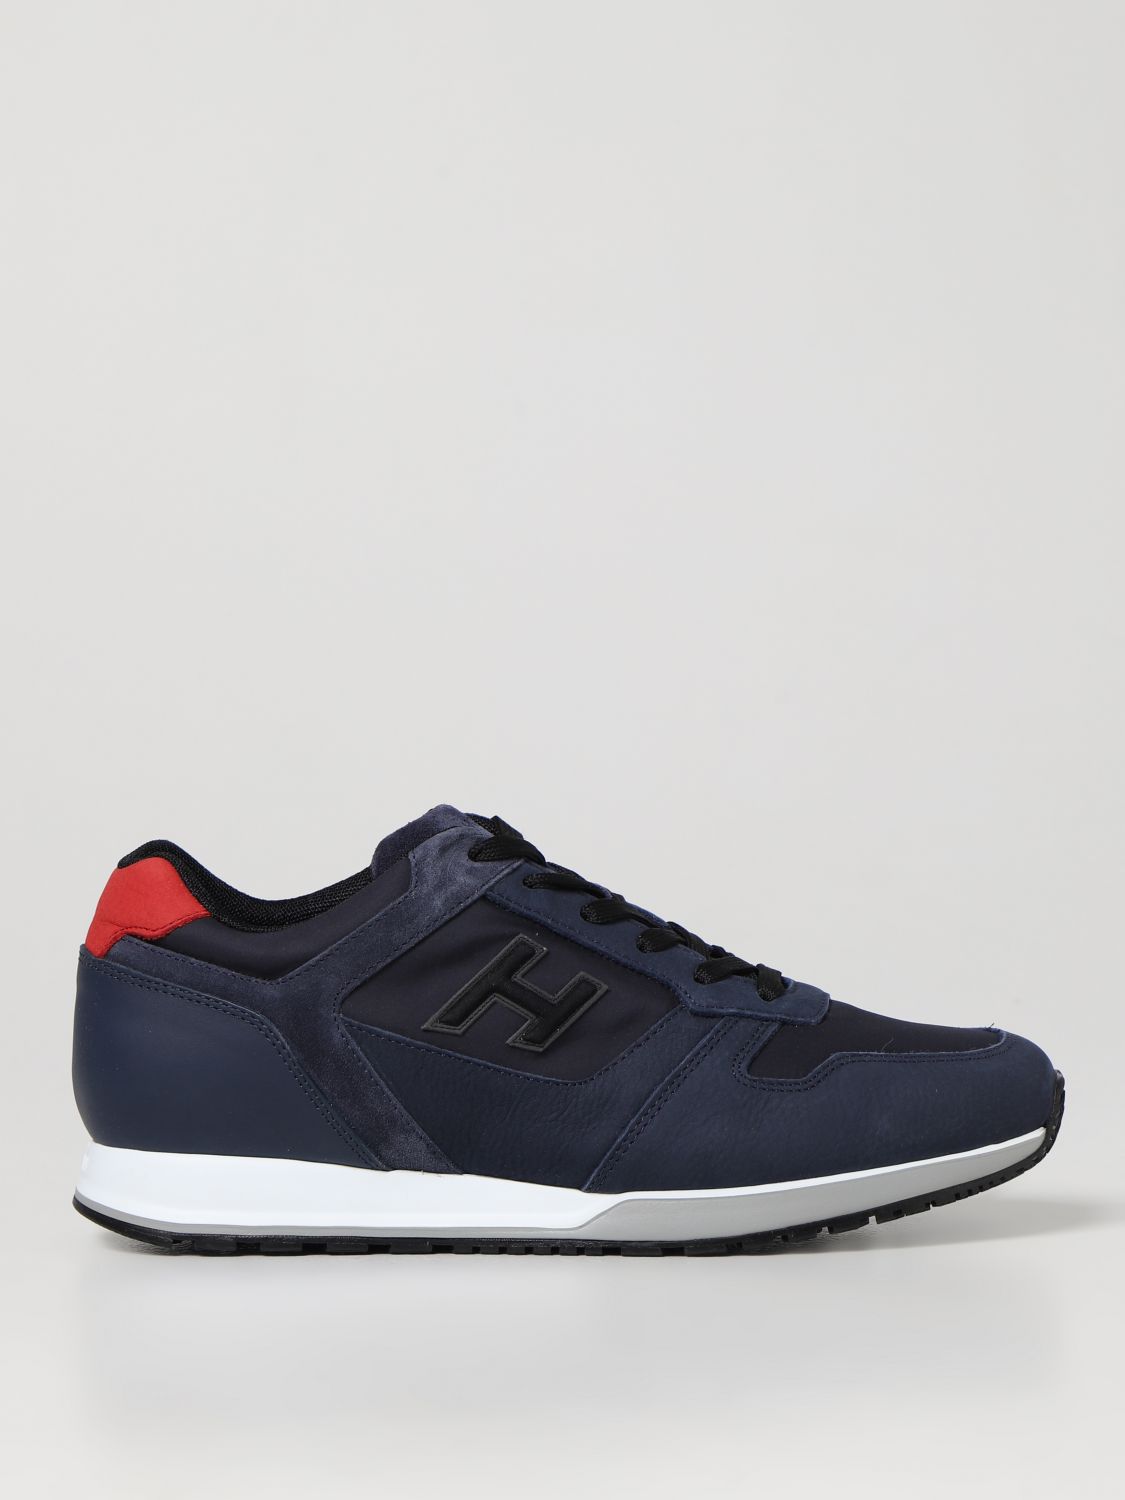 Hogan H321 Sneakers In Leather And Nylon In Blue | ModeSens